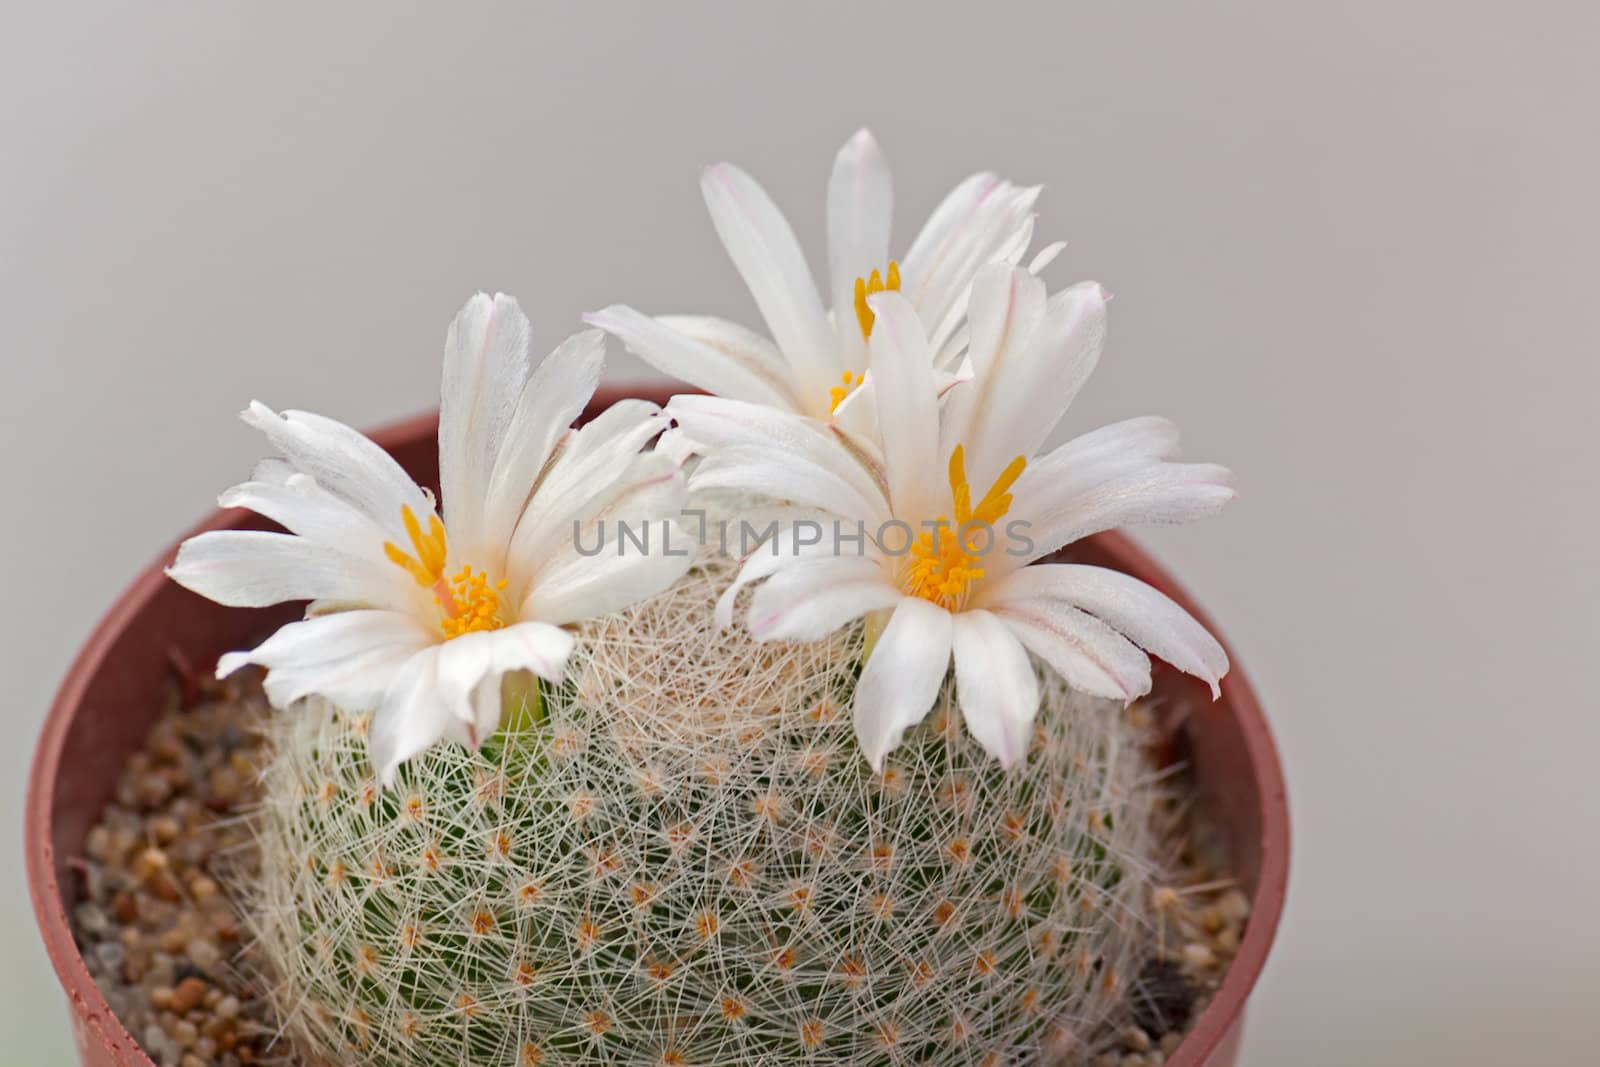 Cactus flowers  on light  background.Image with shallow depth of field.